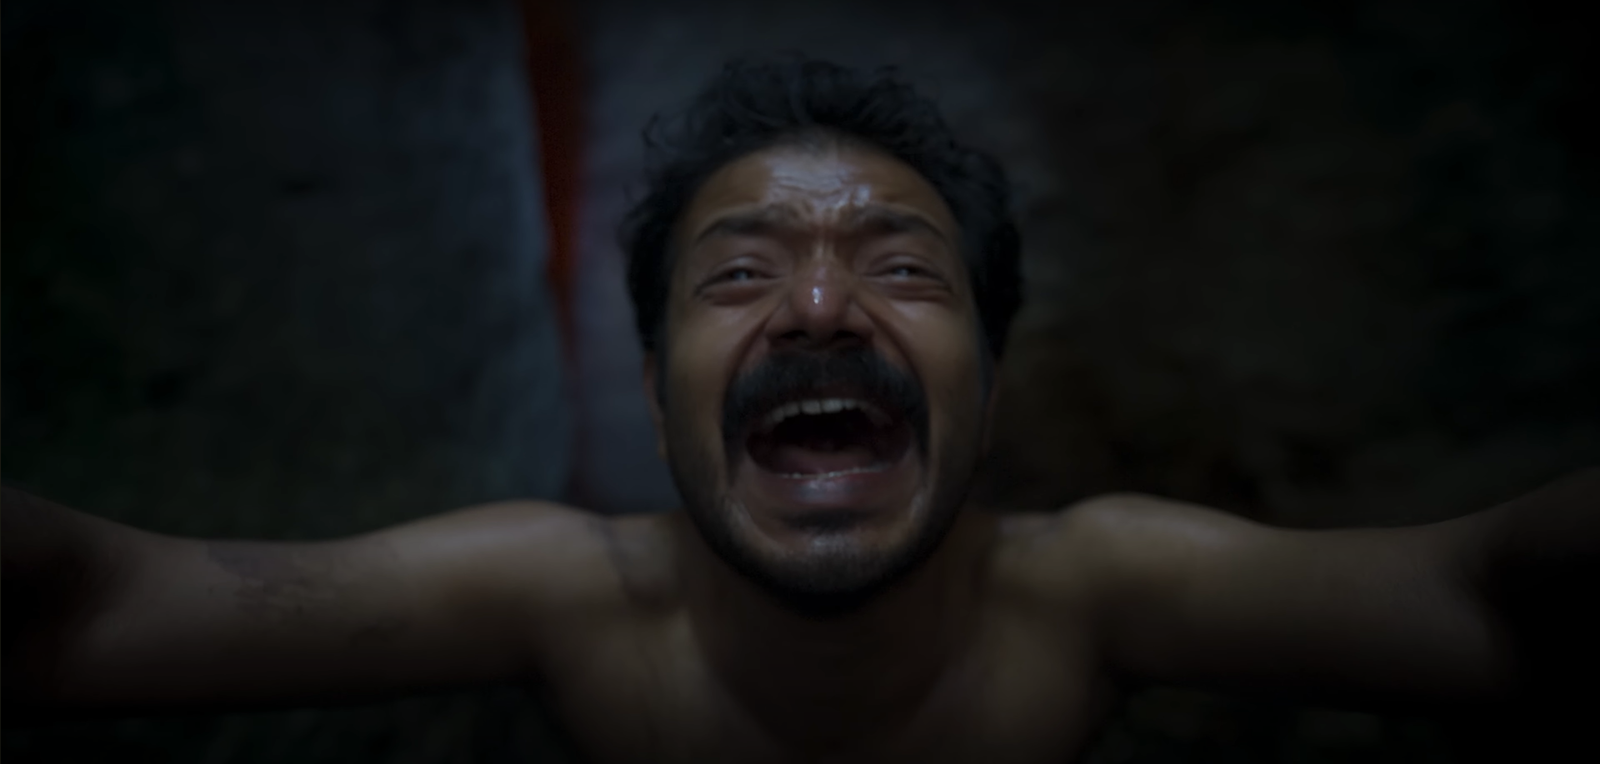 android, manjummel boys movie review: soubin shahir, sreenath bhasi’s chilling survival thriller asserts that hope is a good thing and no good thing ever dies